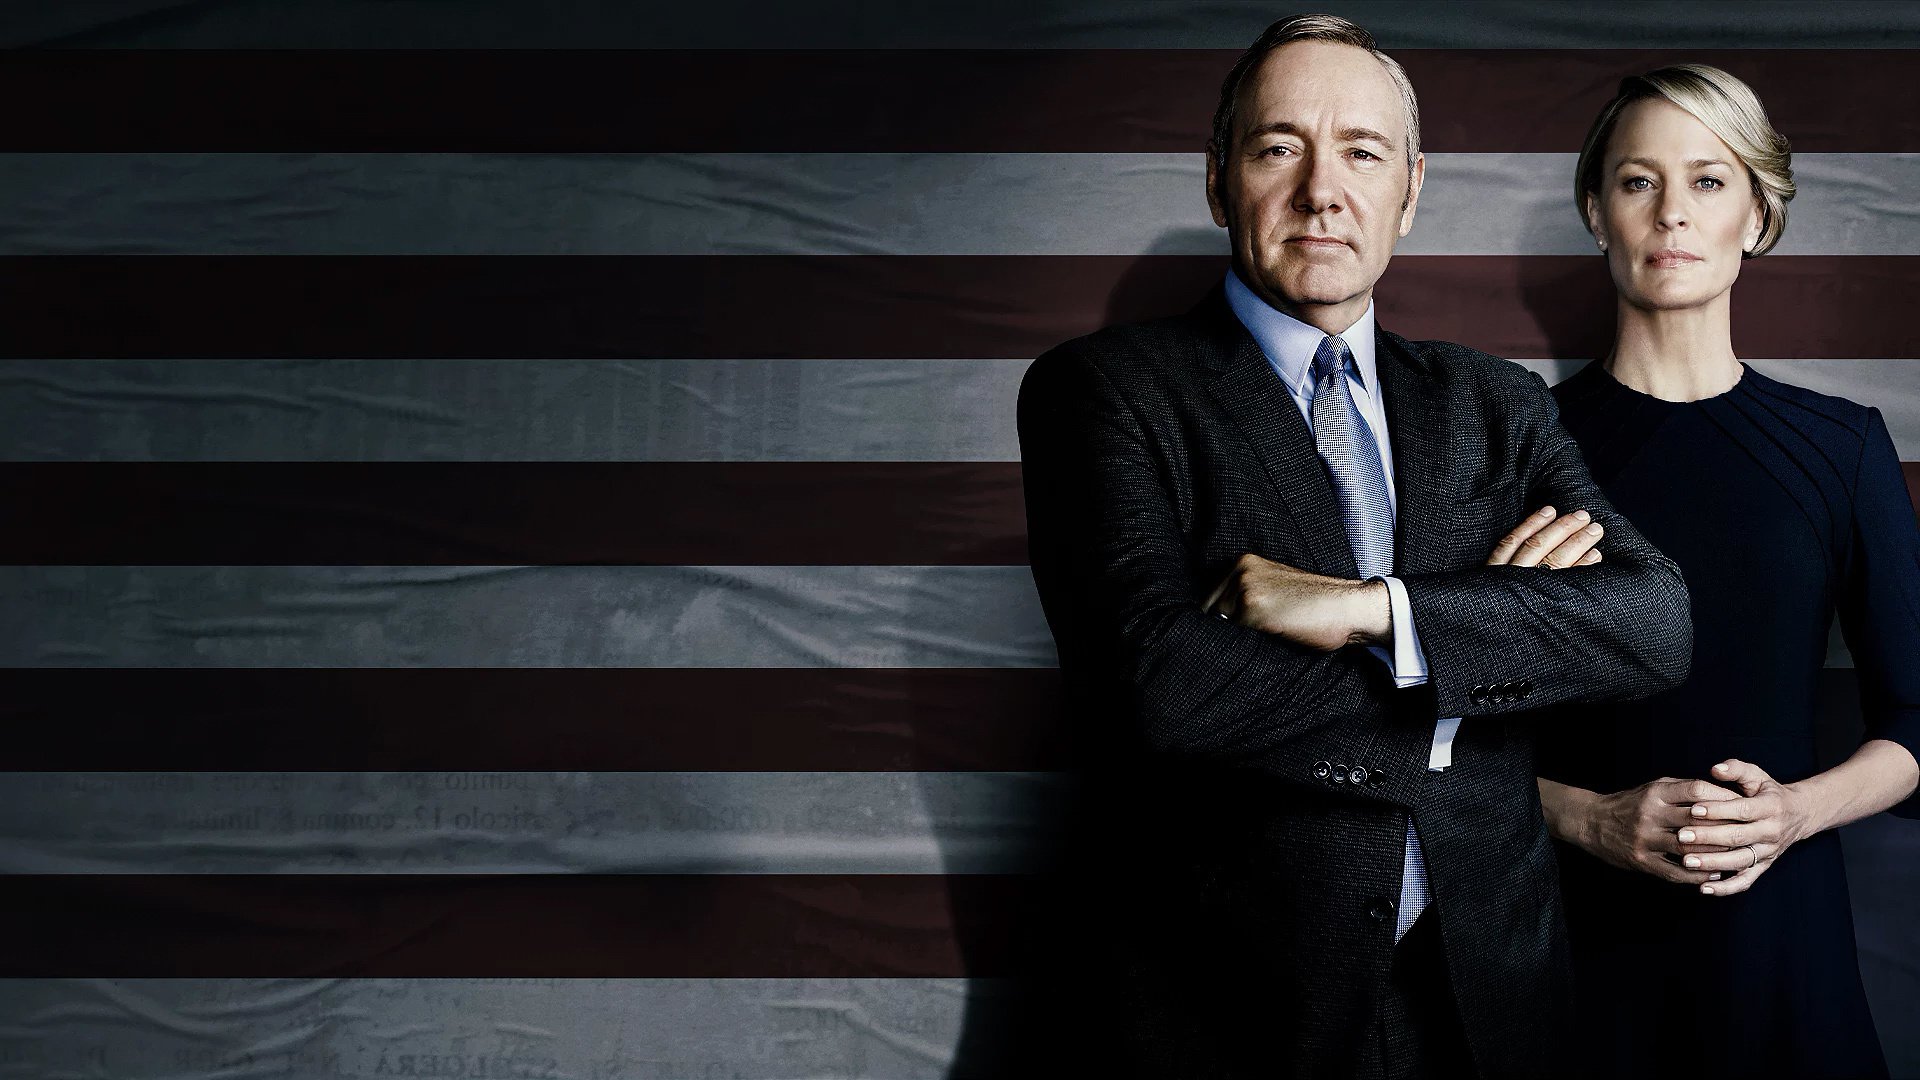 Kevin Spacey Robin Wright 1920x1080